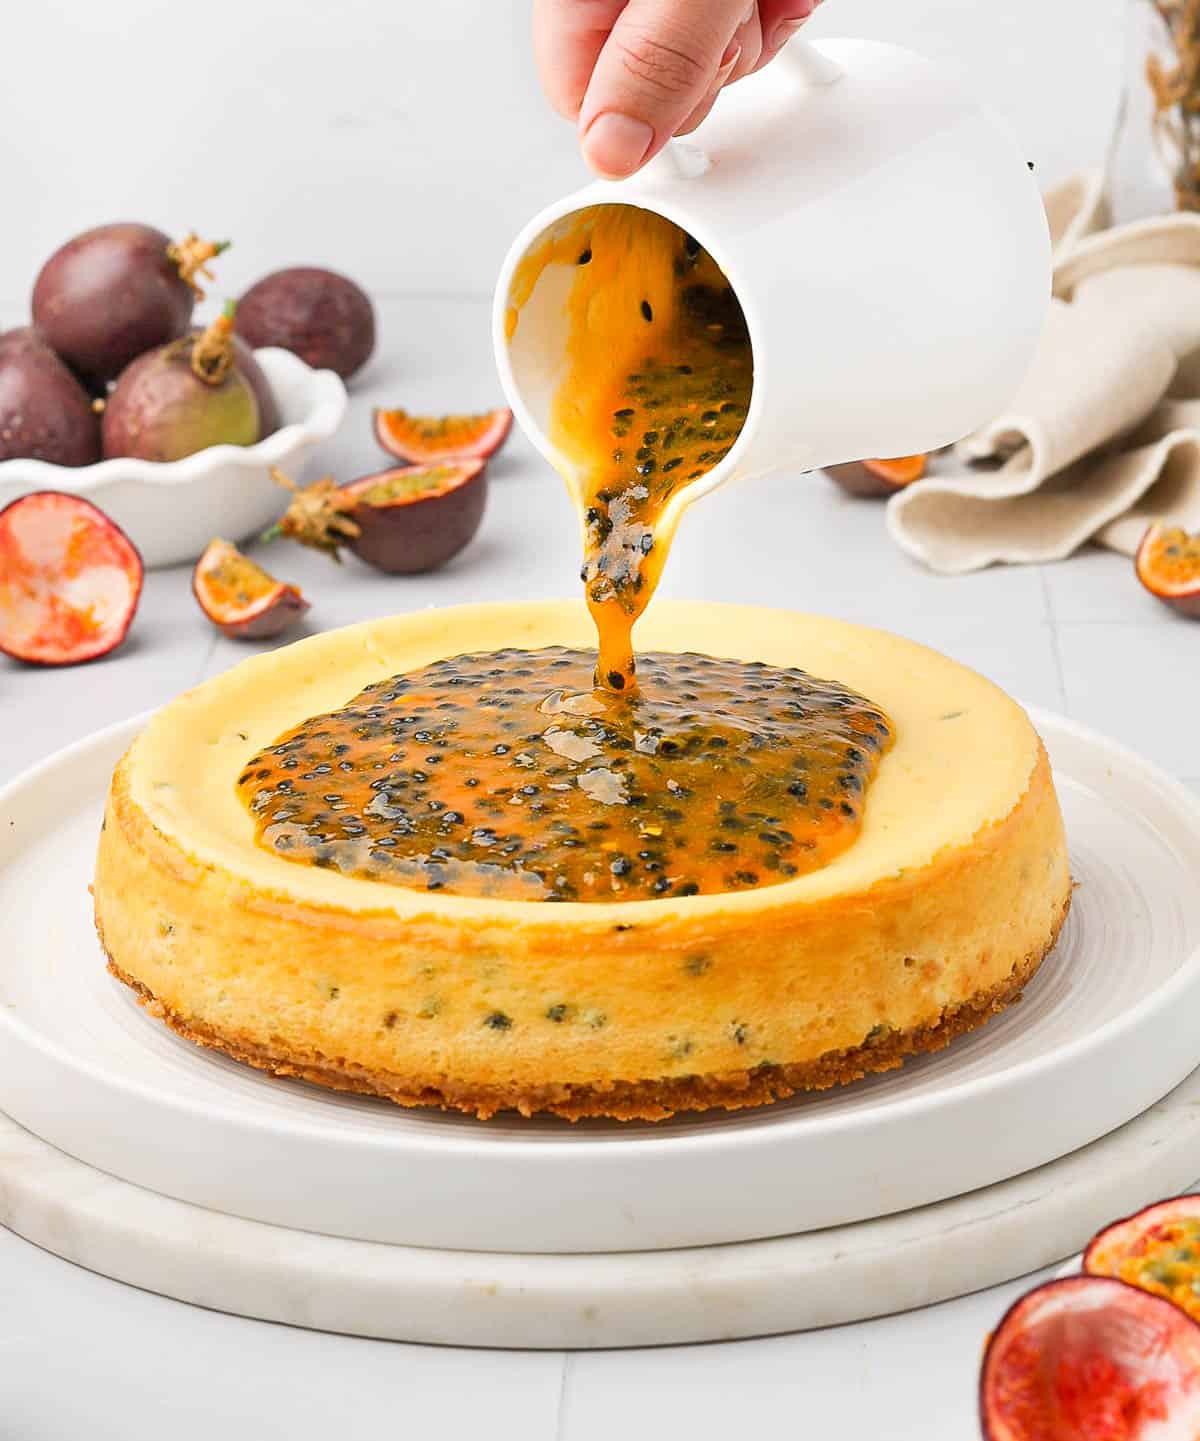 Pouring the passion fruit coulis topping over the cheesecake.